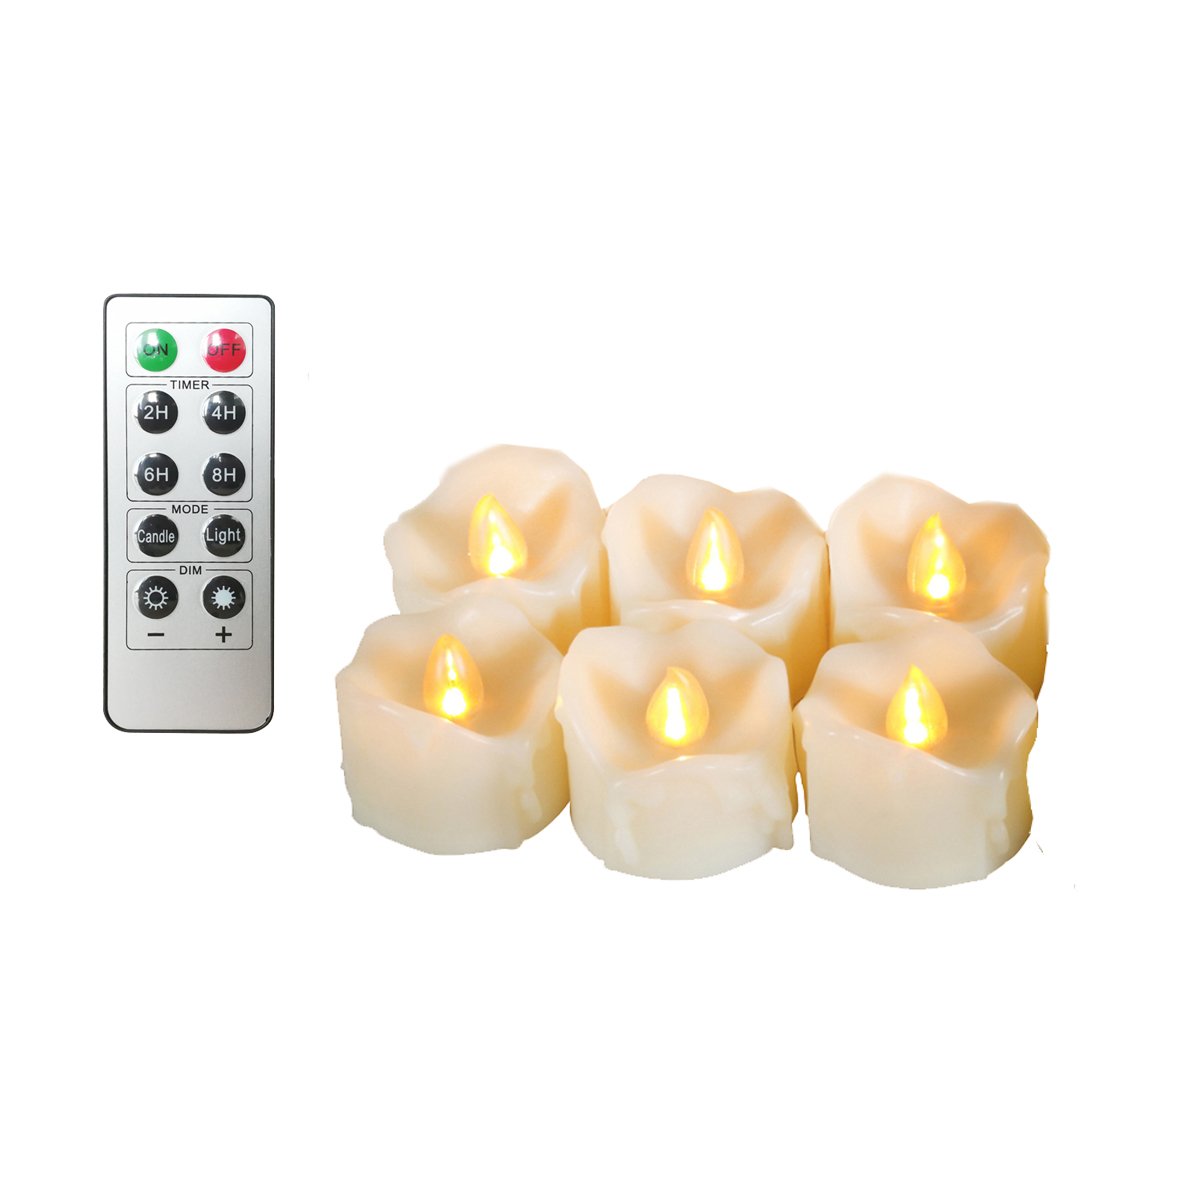 Erosway Flameless Candles, Realistic Flickering LED Tea Lights Battery Operated, 200 Hours of Nonstop Working with Remote and 2/4/6/8 Hours Timer. 6pcs/pack